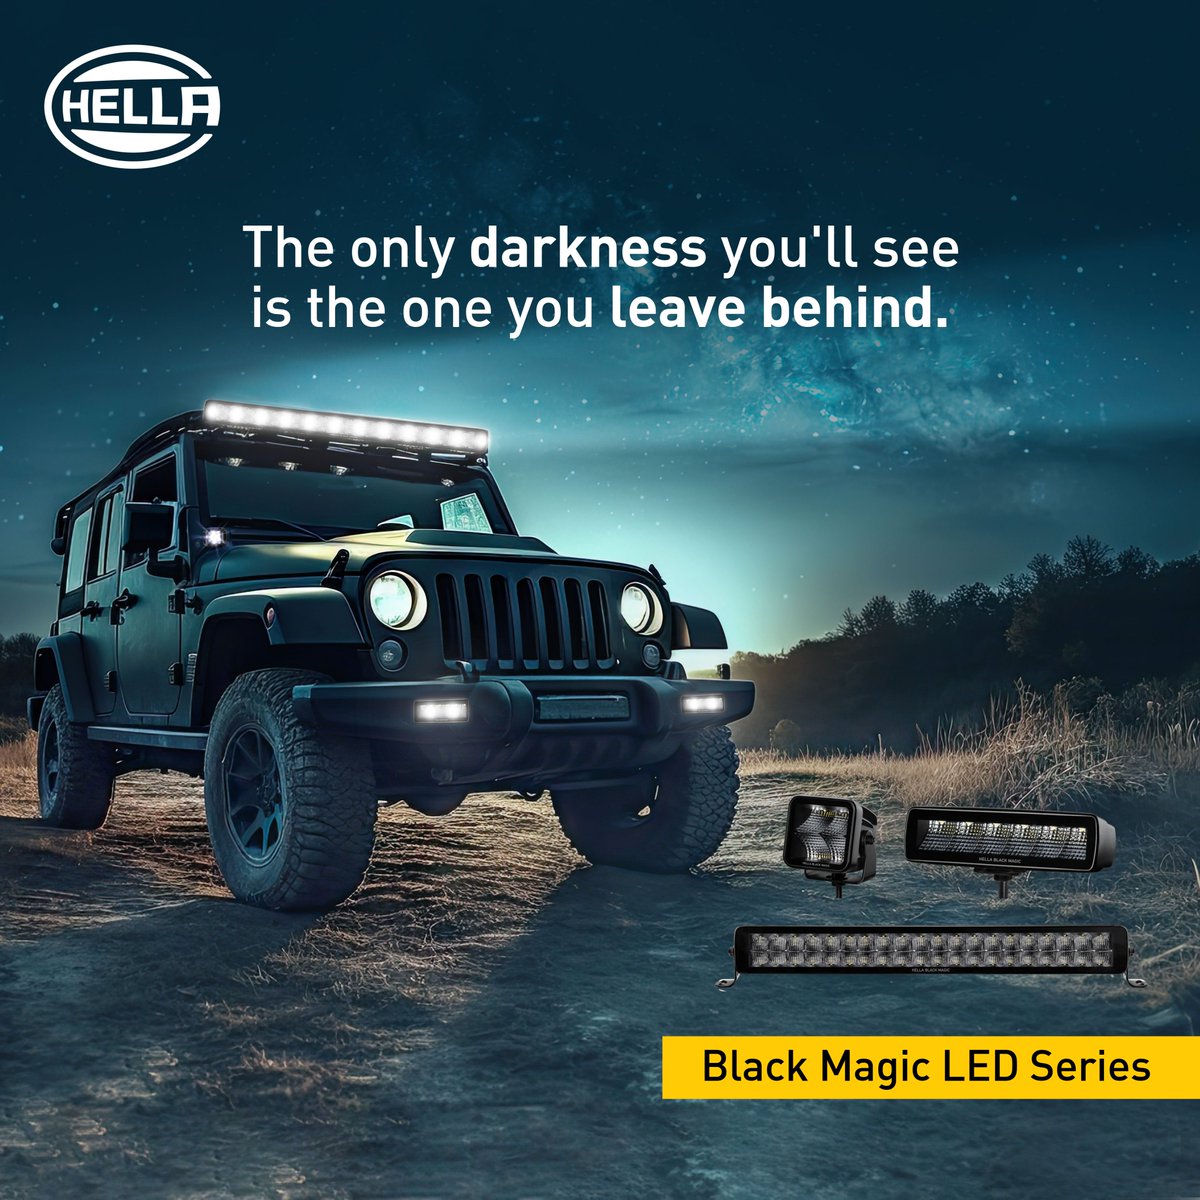 With Black Magic LEDs, your path is not just illuminated, it's transformed. Leave the darkness behind and see everything coming your way!

Get yours today!
🌐 shop4hella.com
📞 1800 103 5405

#BlackMagicLightbar #Lightbars #Brighter #HELLAIndia #AutomotiveAftermarket